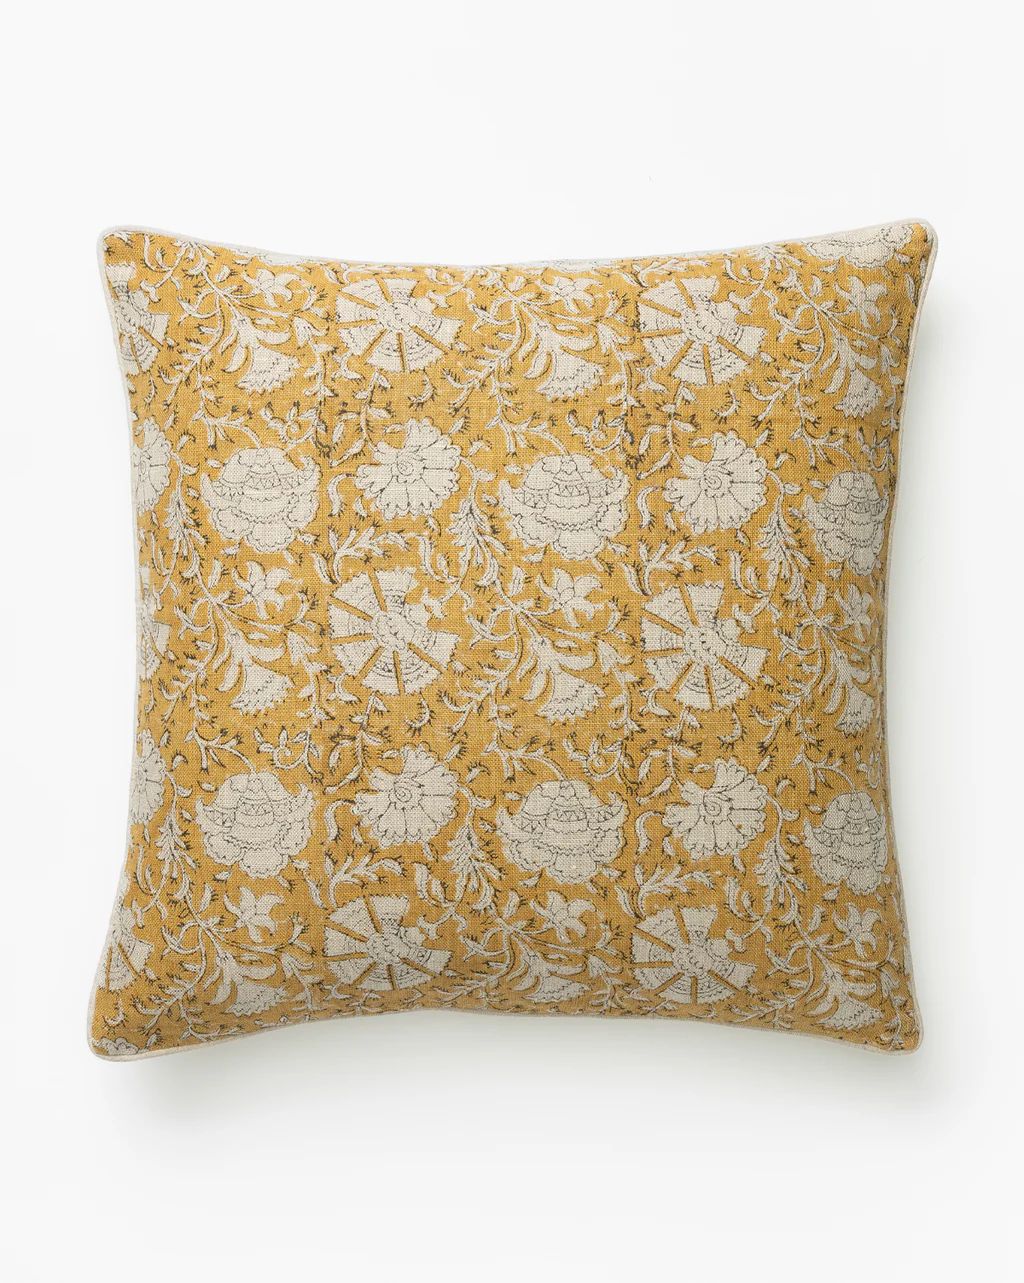 Bern Pillow Cover | McGee & Co.